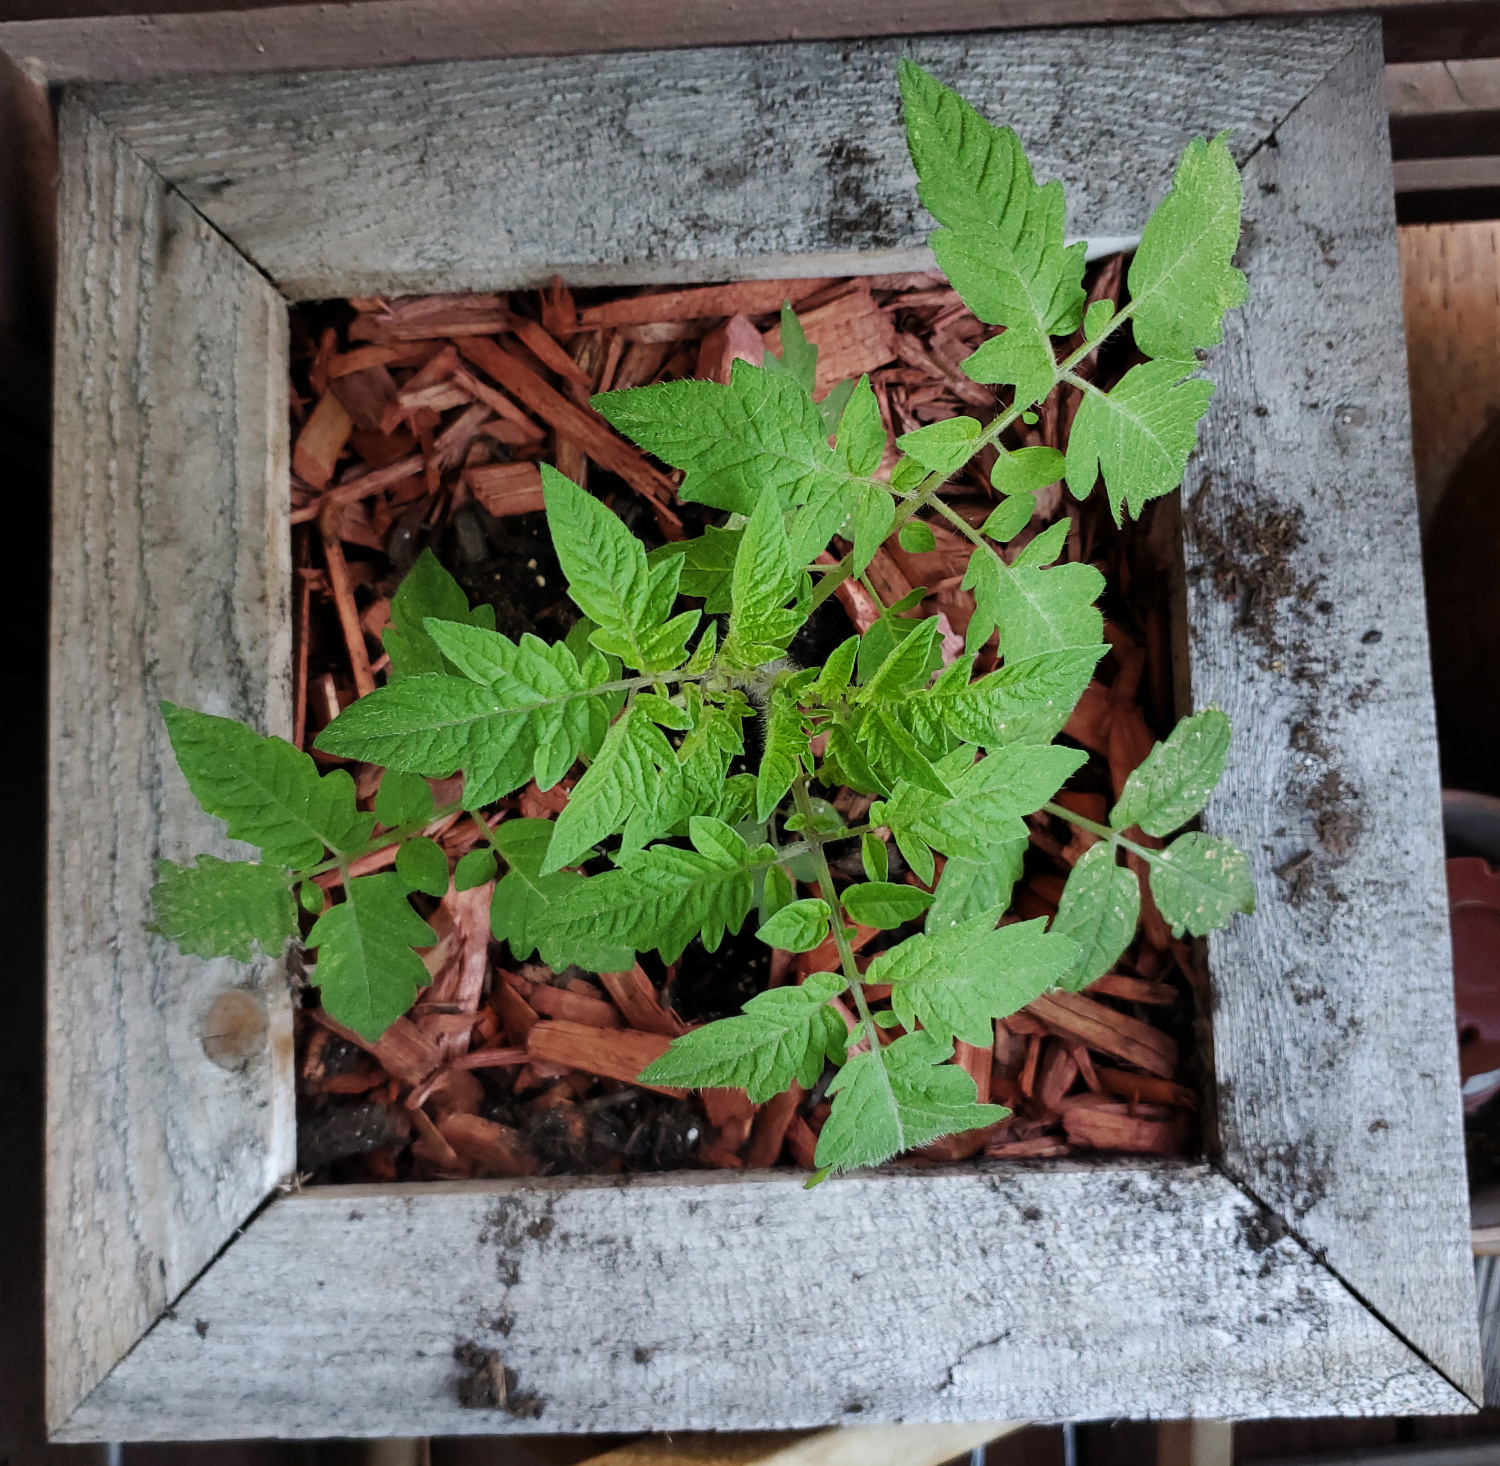 The tomato plant is finally starting to take off